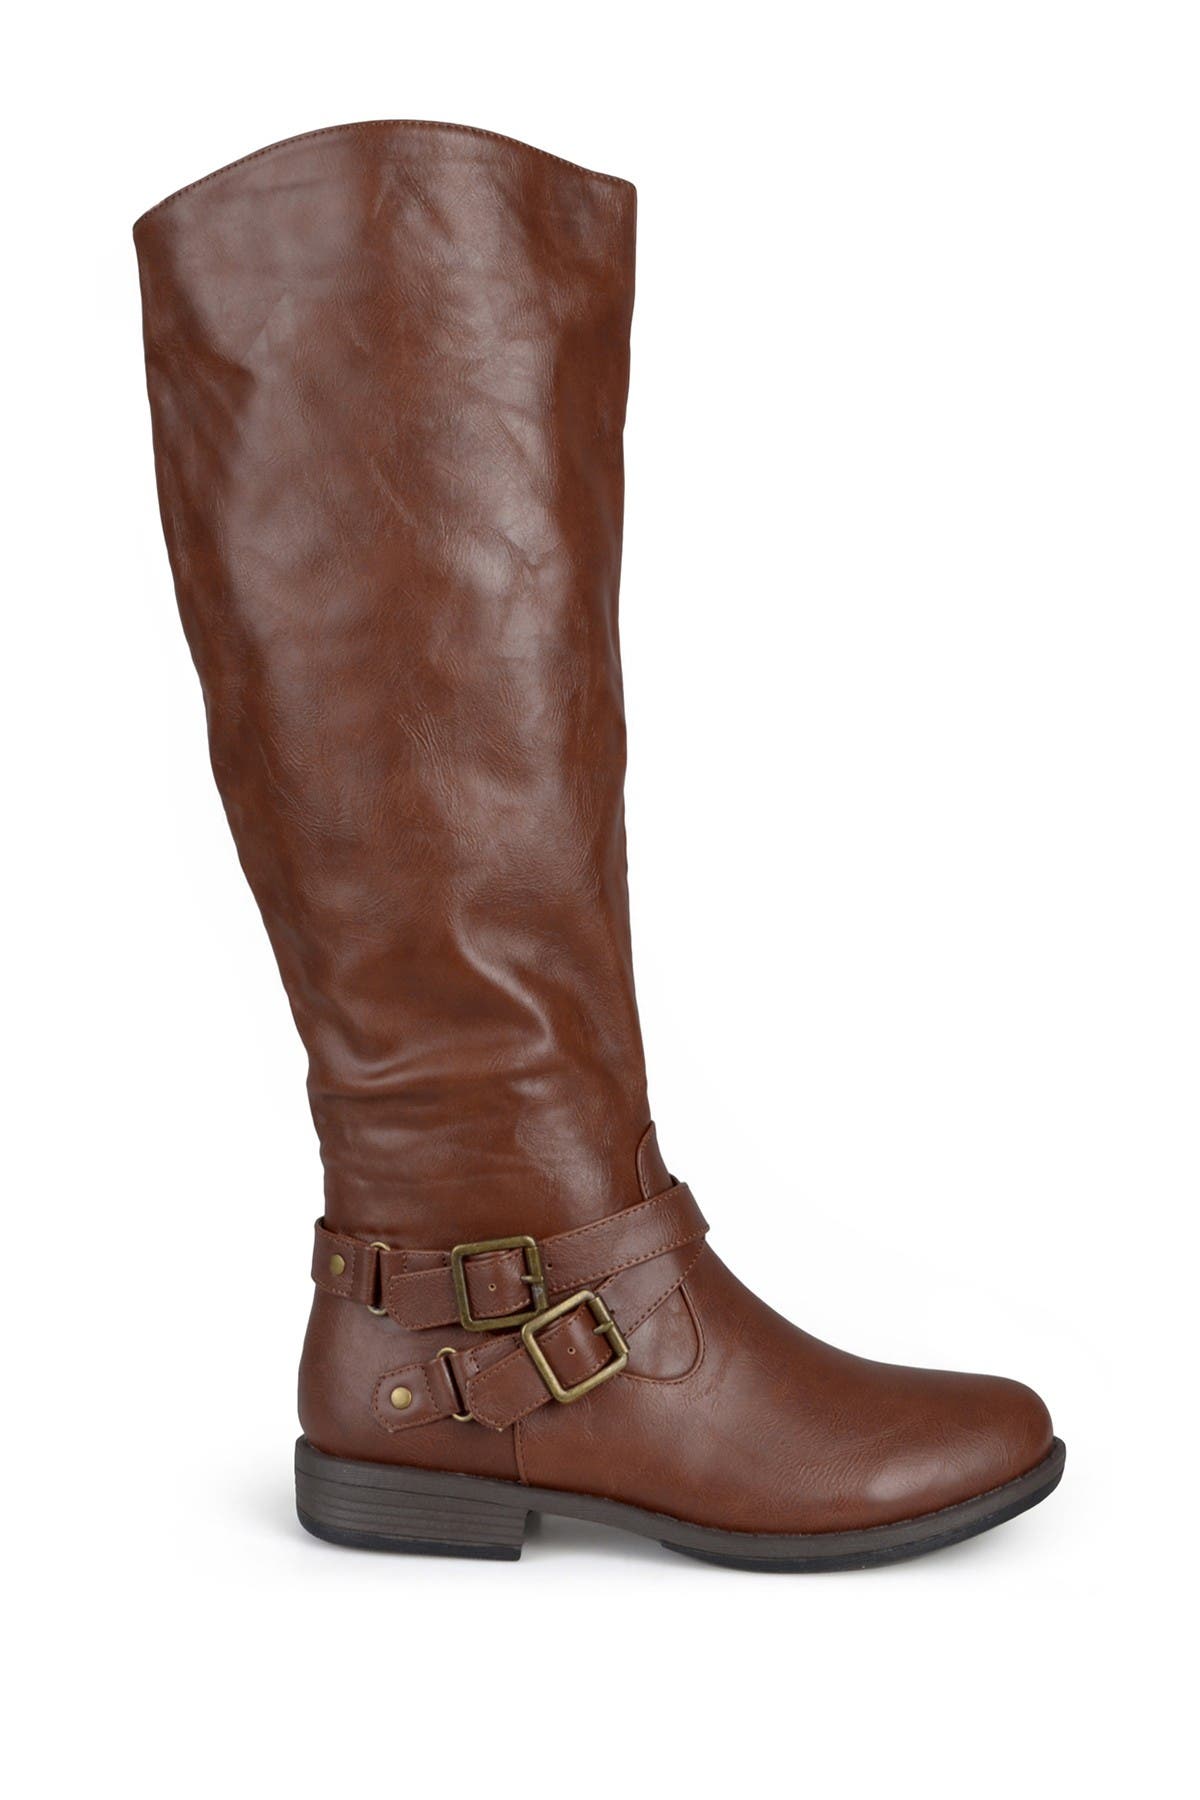 journee collection boots